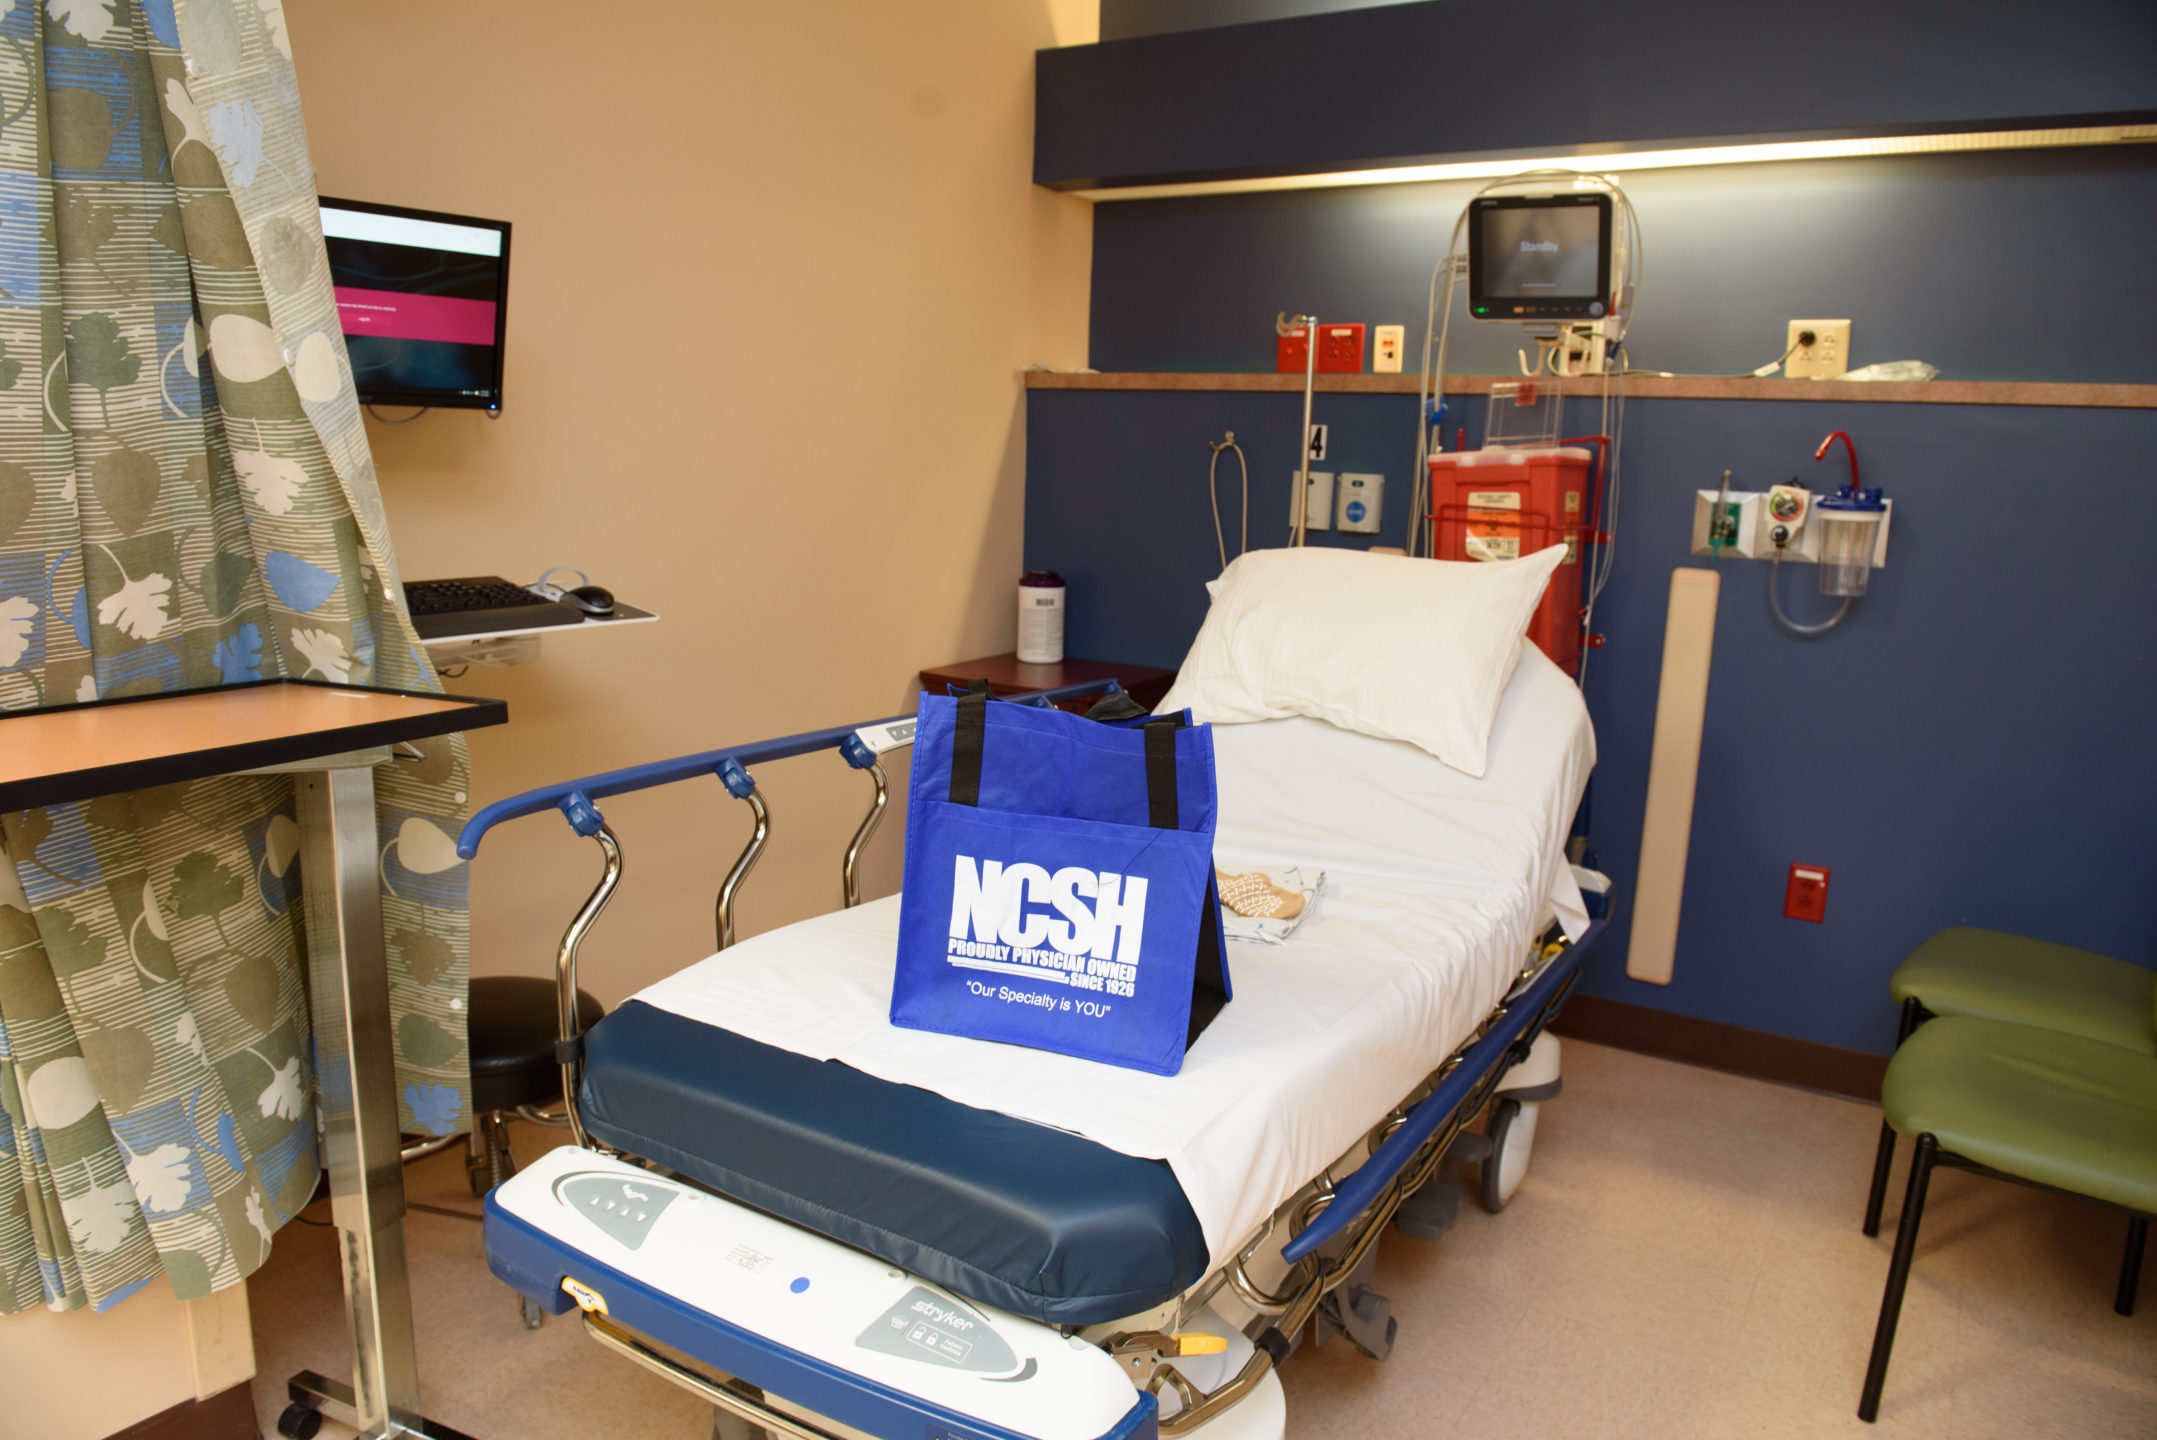 A patient bed is set up and ready, with an NCSH bag and gifts.